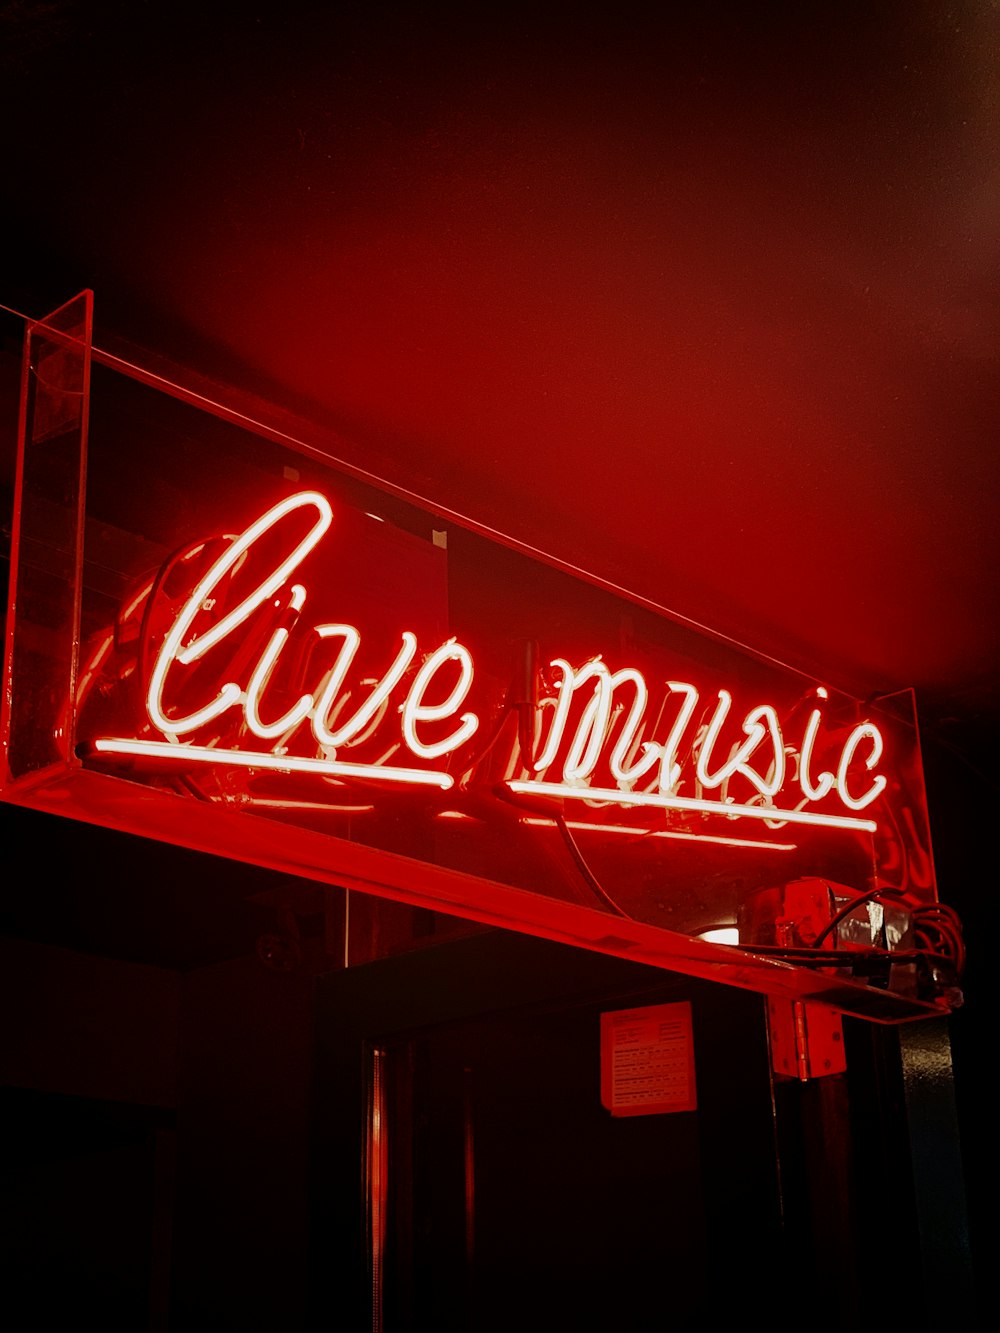 Live Music neon sign